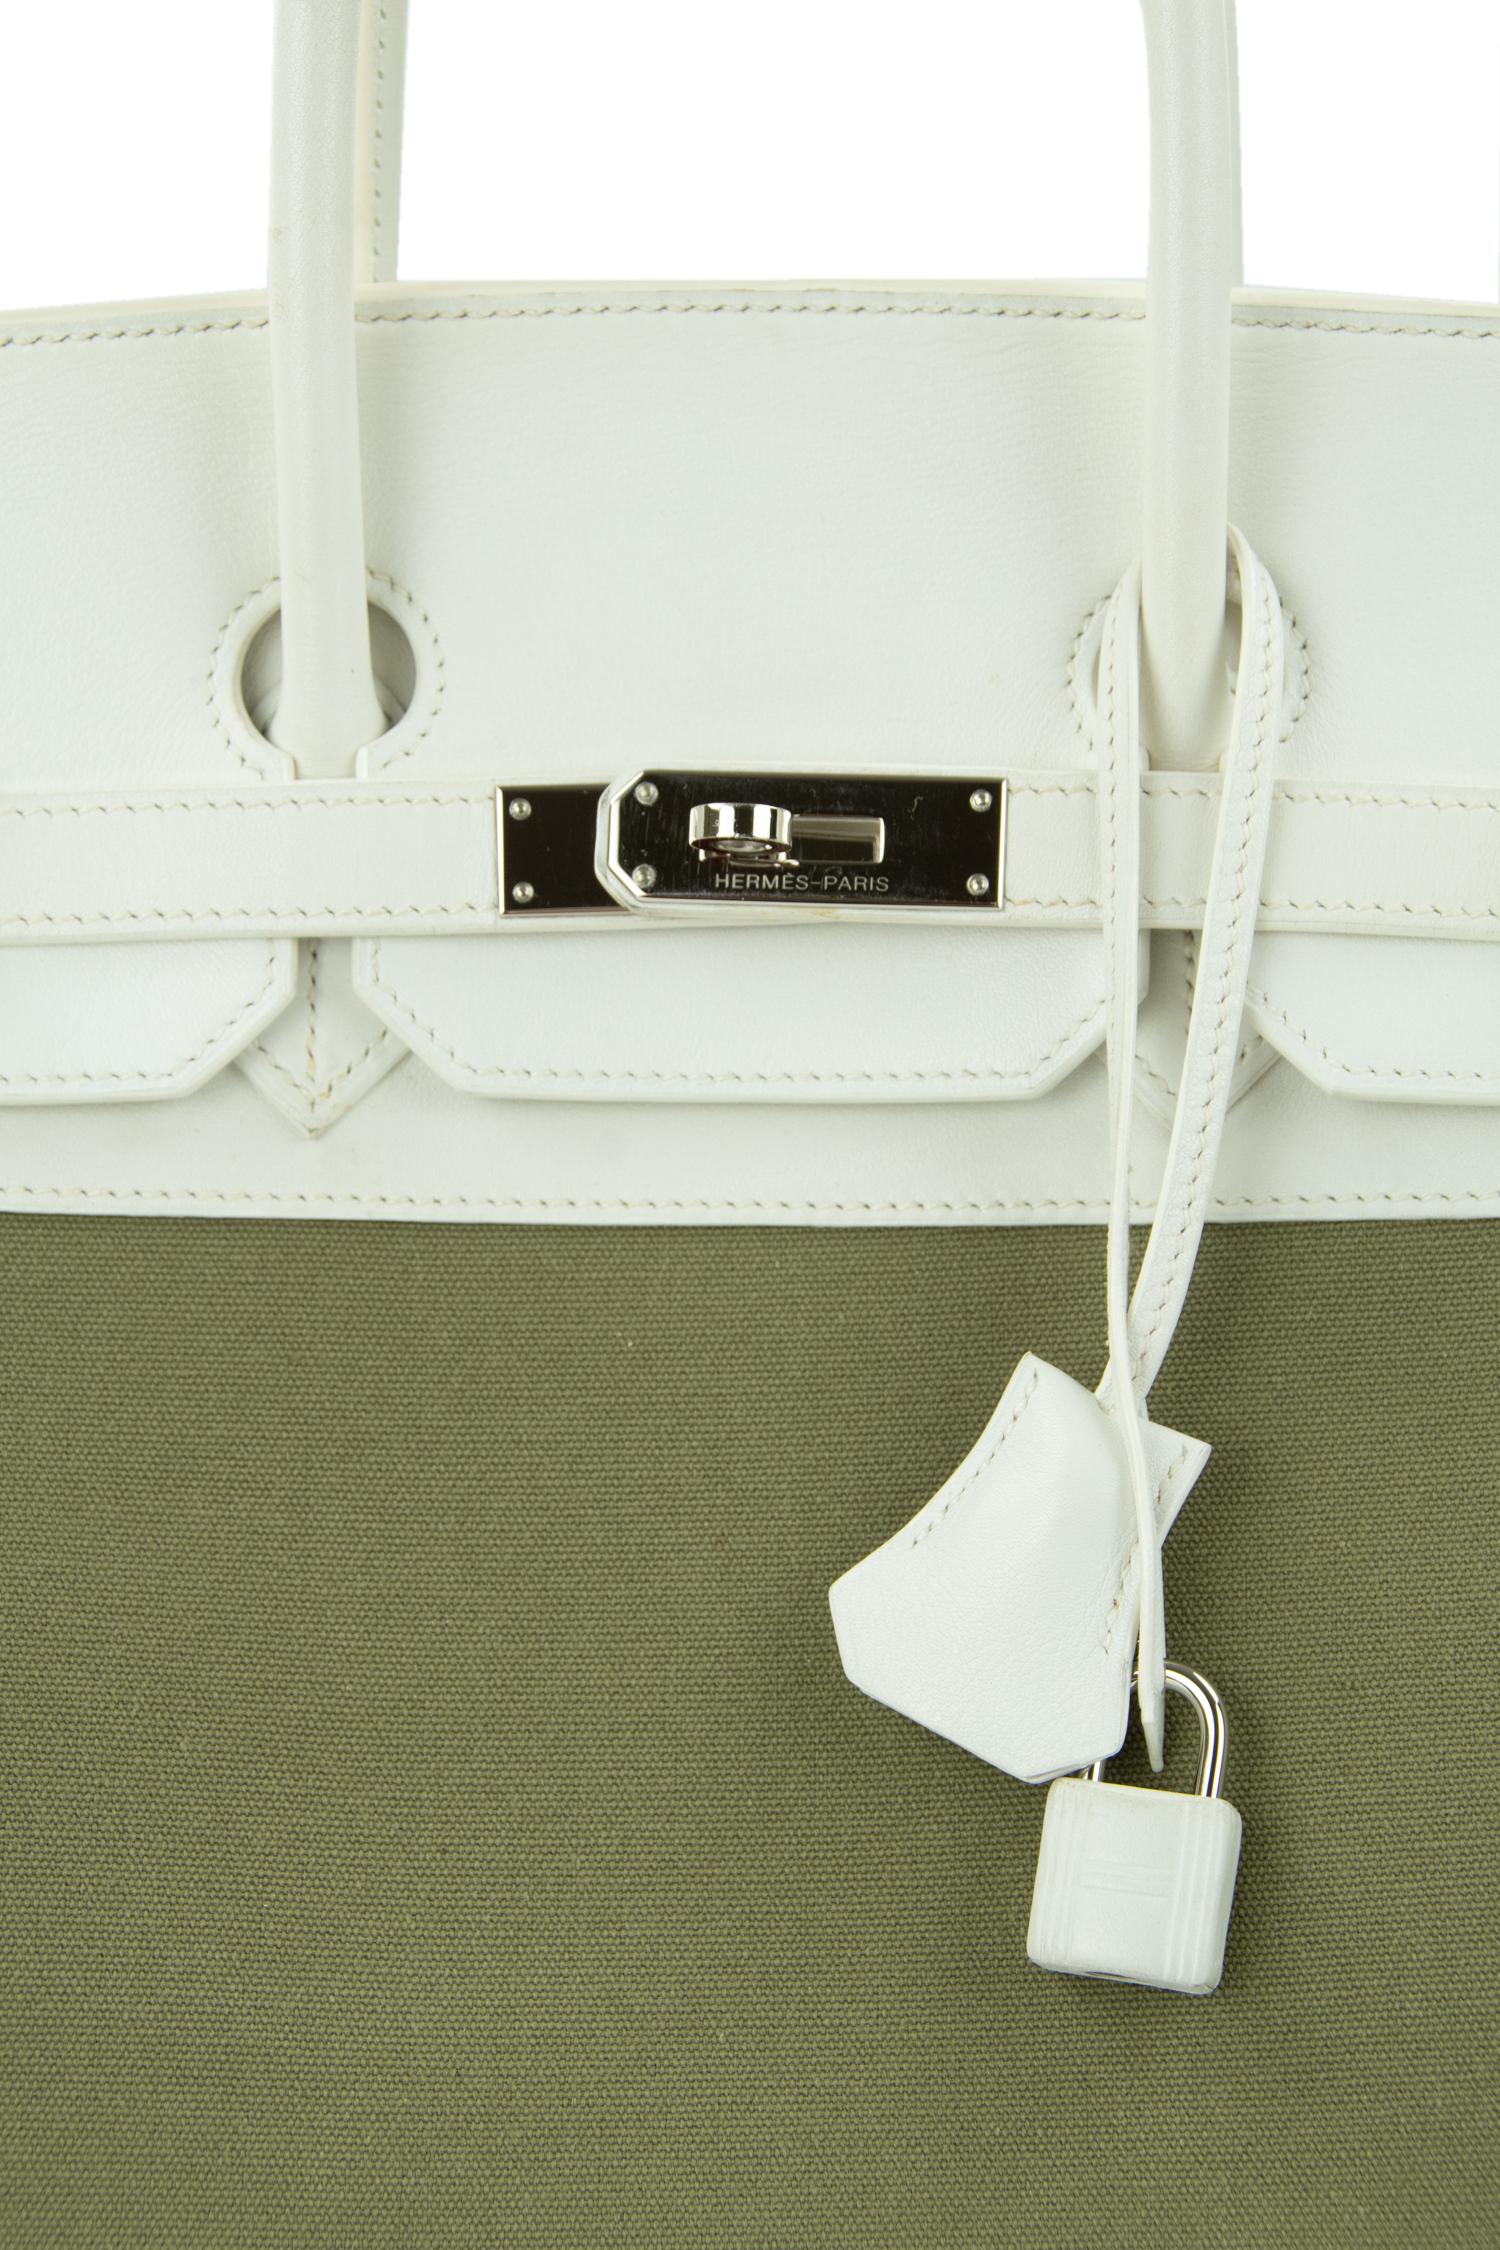 Hermes Birkin Bag 35cm Olive Toile Officier Canvas White Leather PHW (Pre Owned) For Sale 2